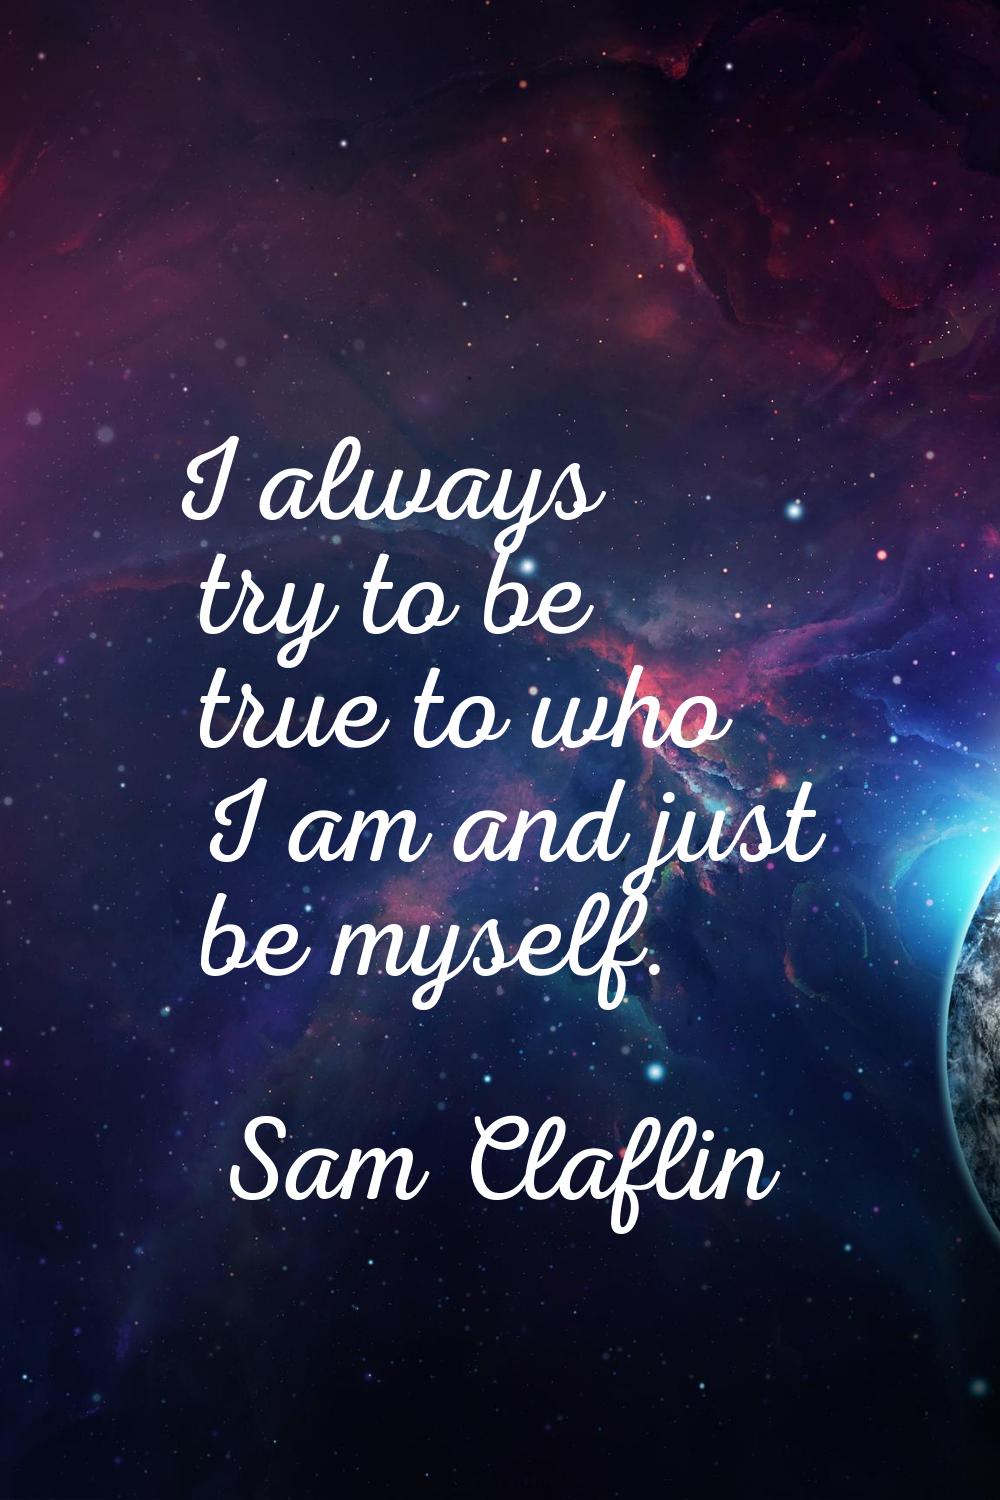 I always try to be true to who I am and just be myself.